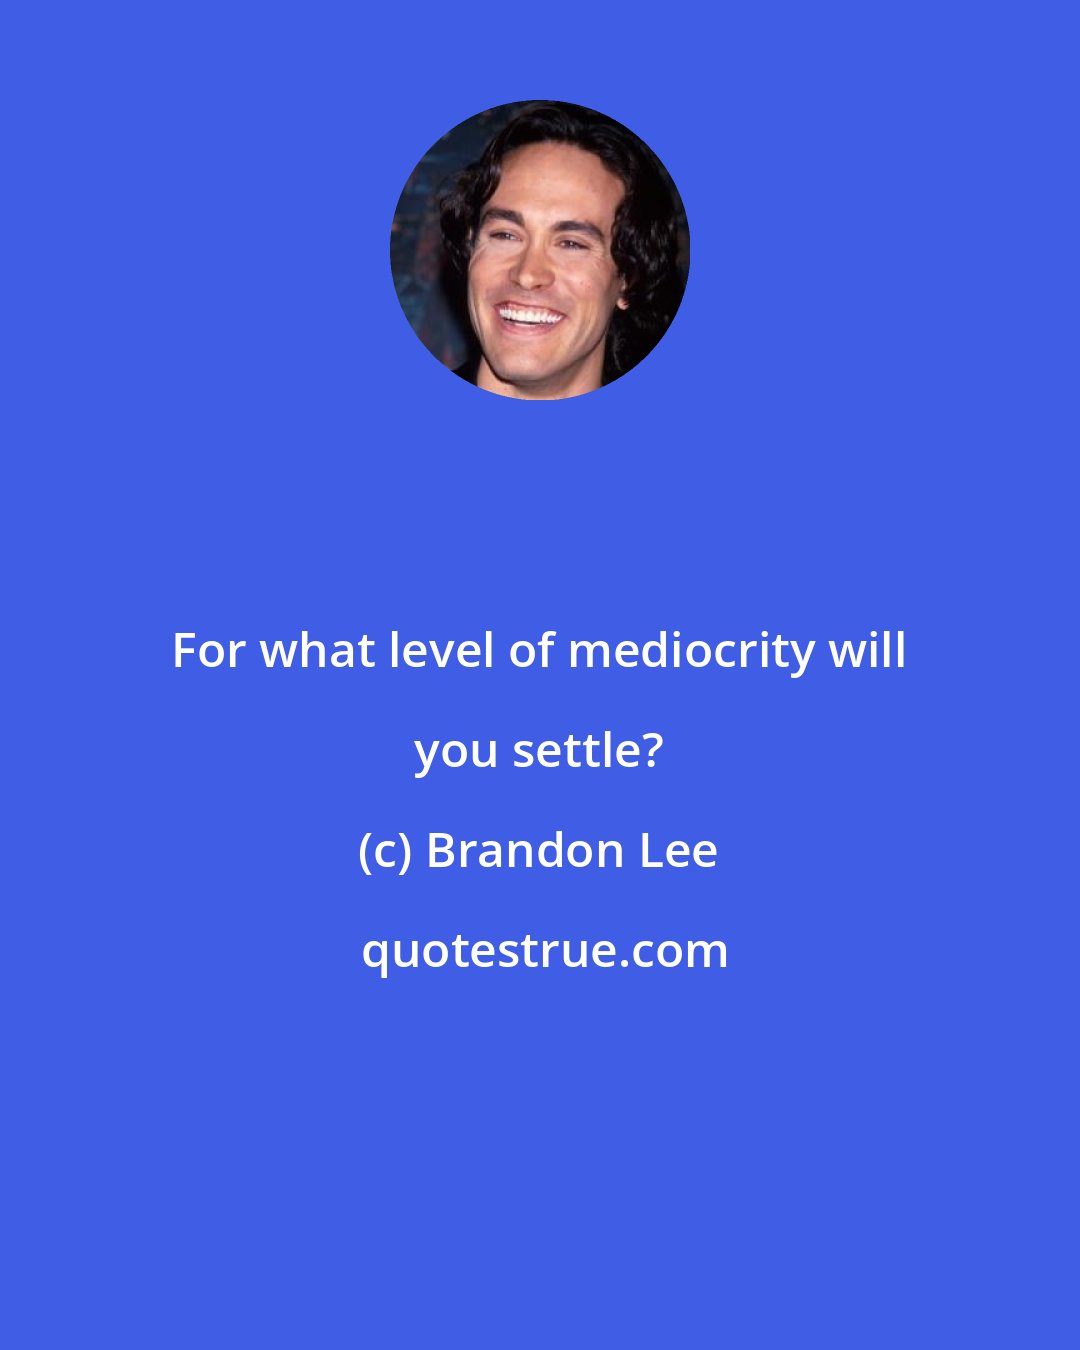 Brandon Lee: For what level of mediocrity will you settle?